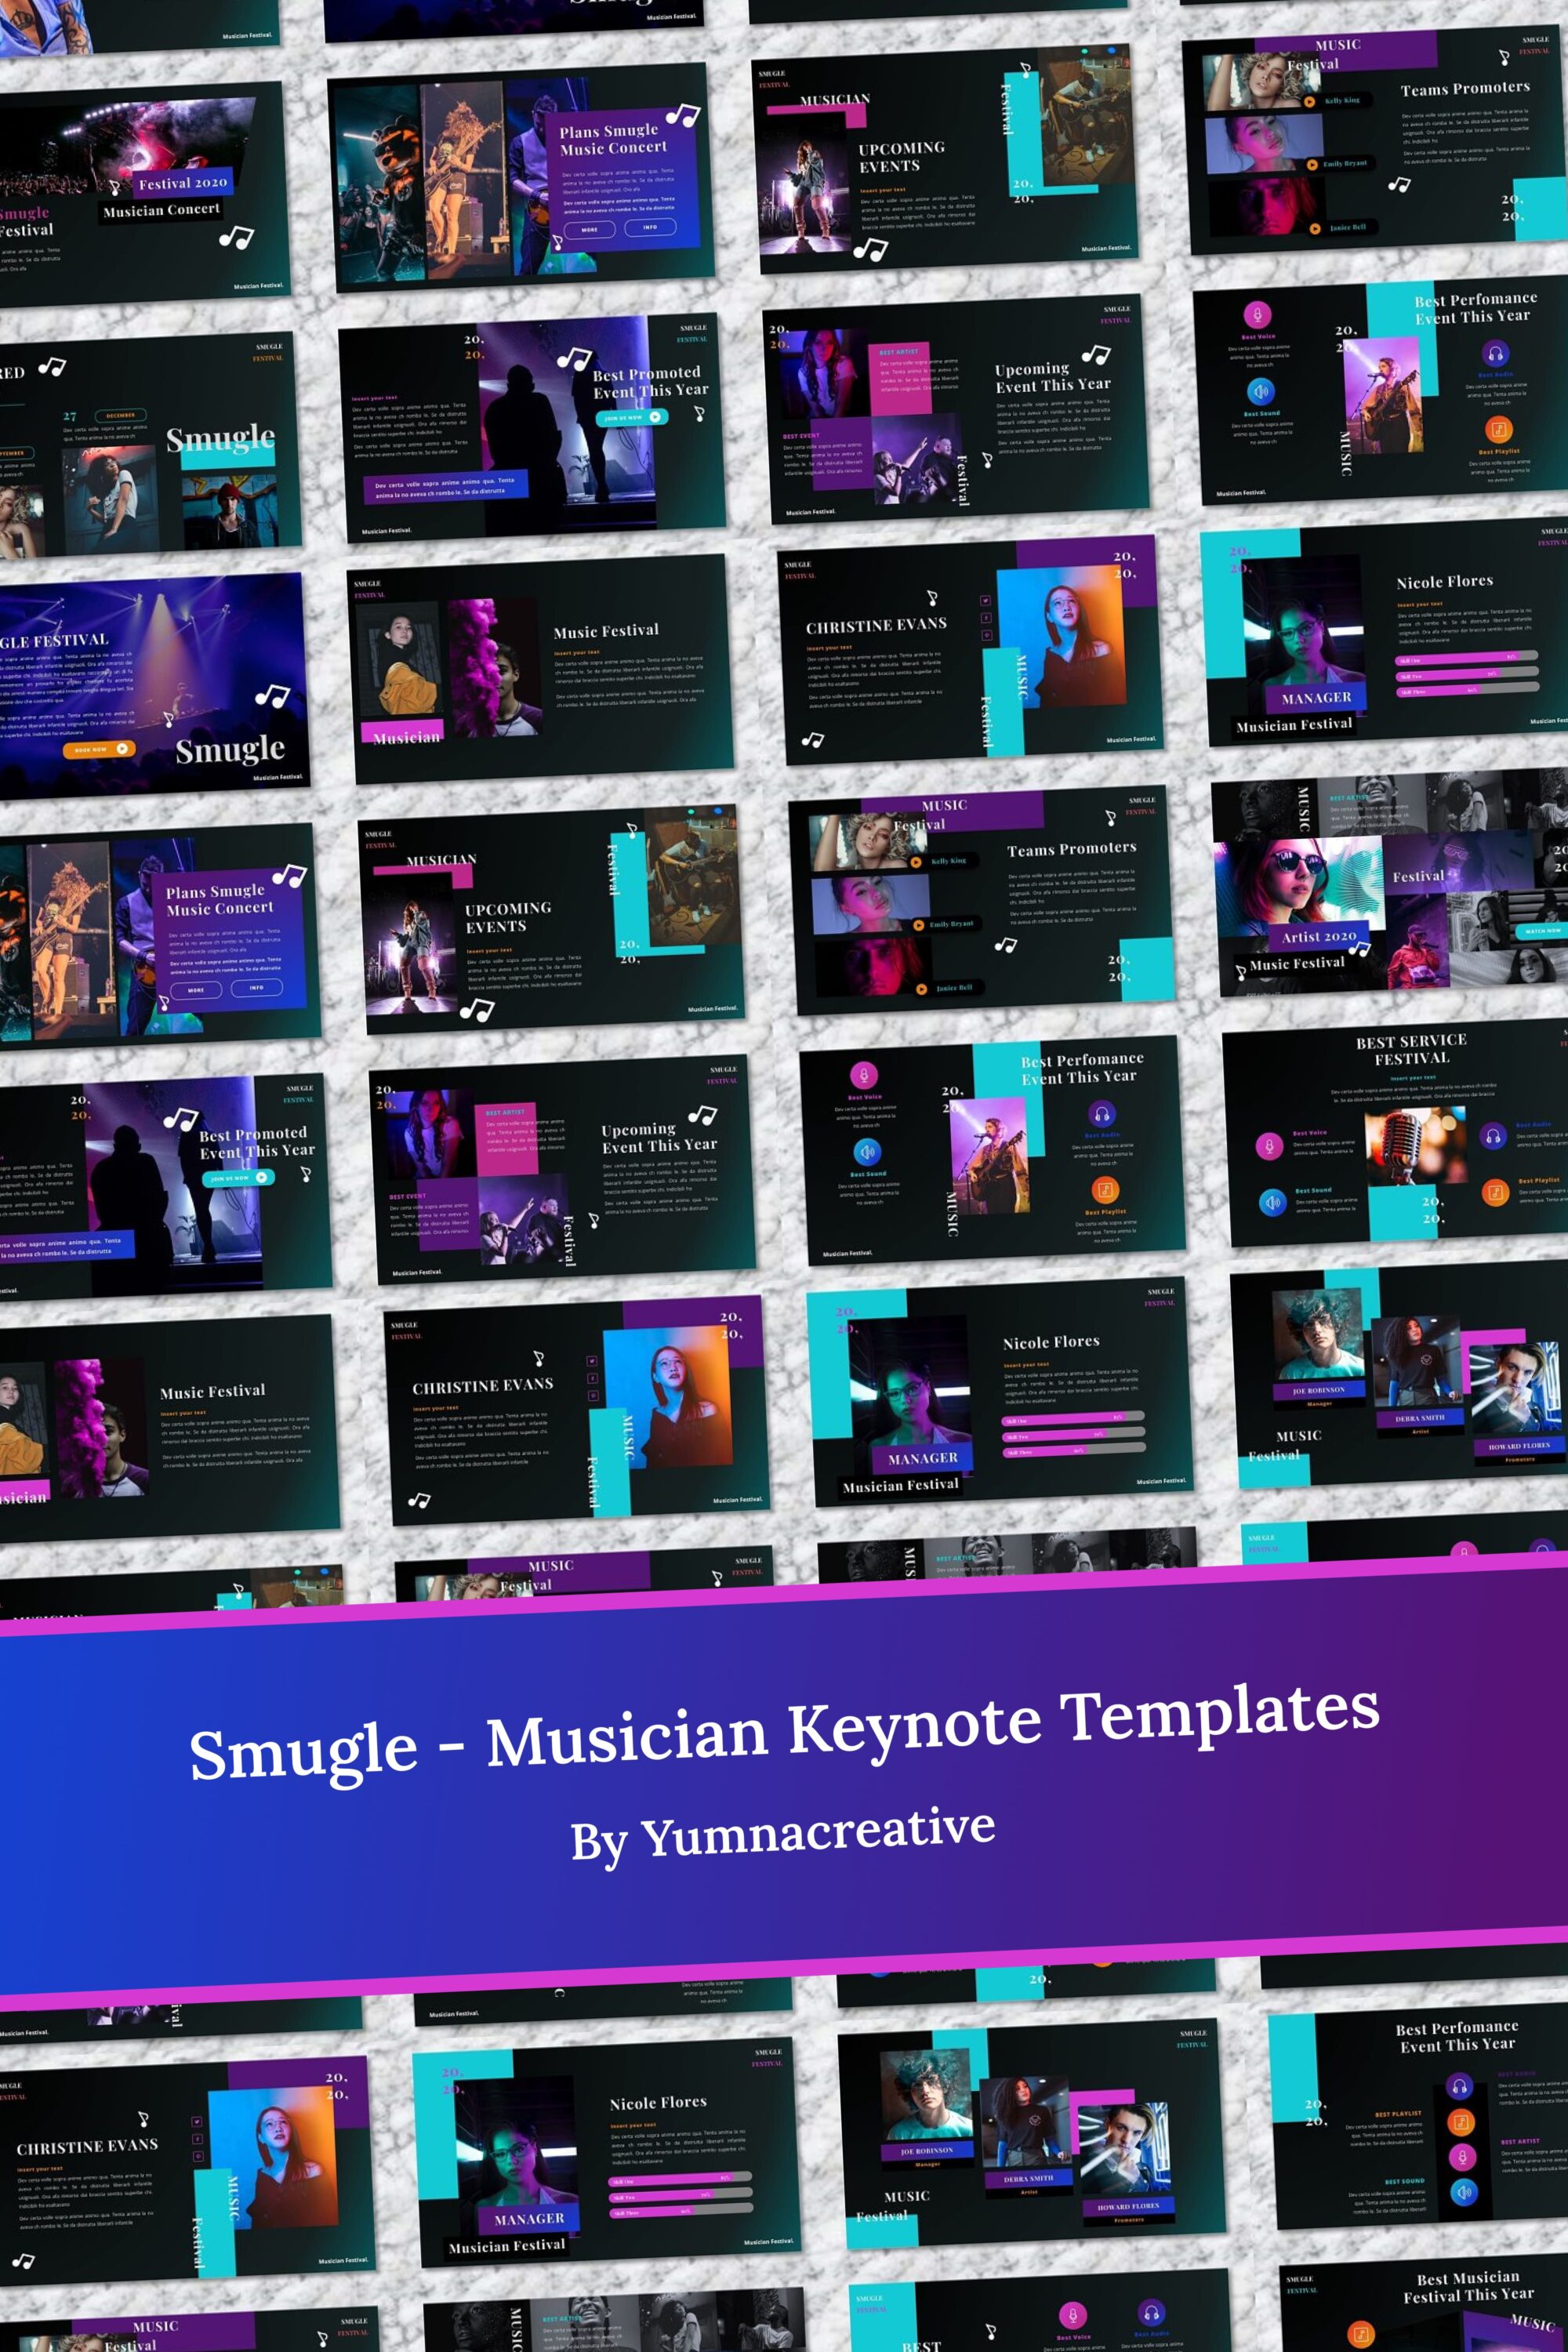 Smugle Musician Keynote Template - pinterest image preview.